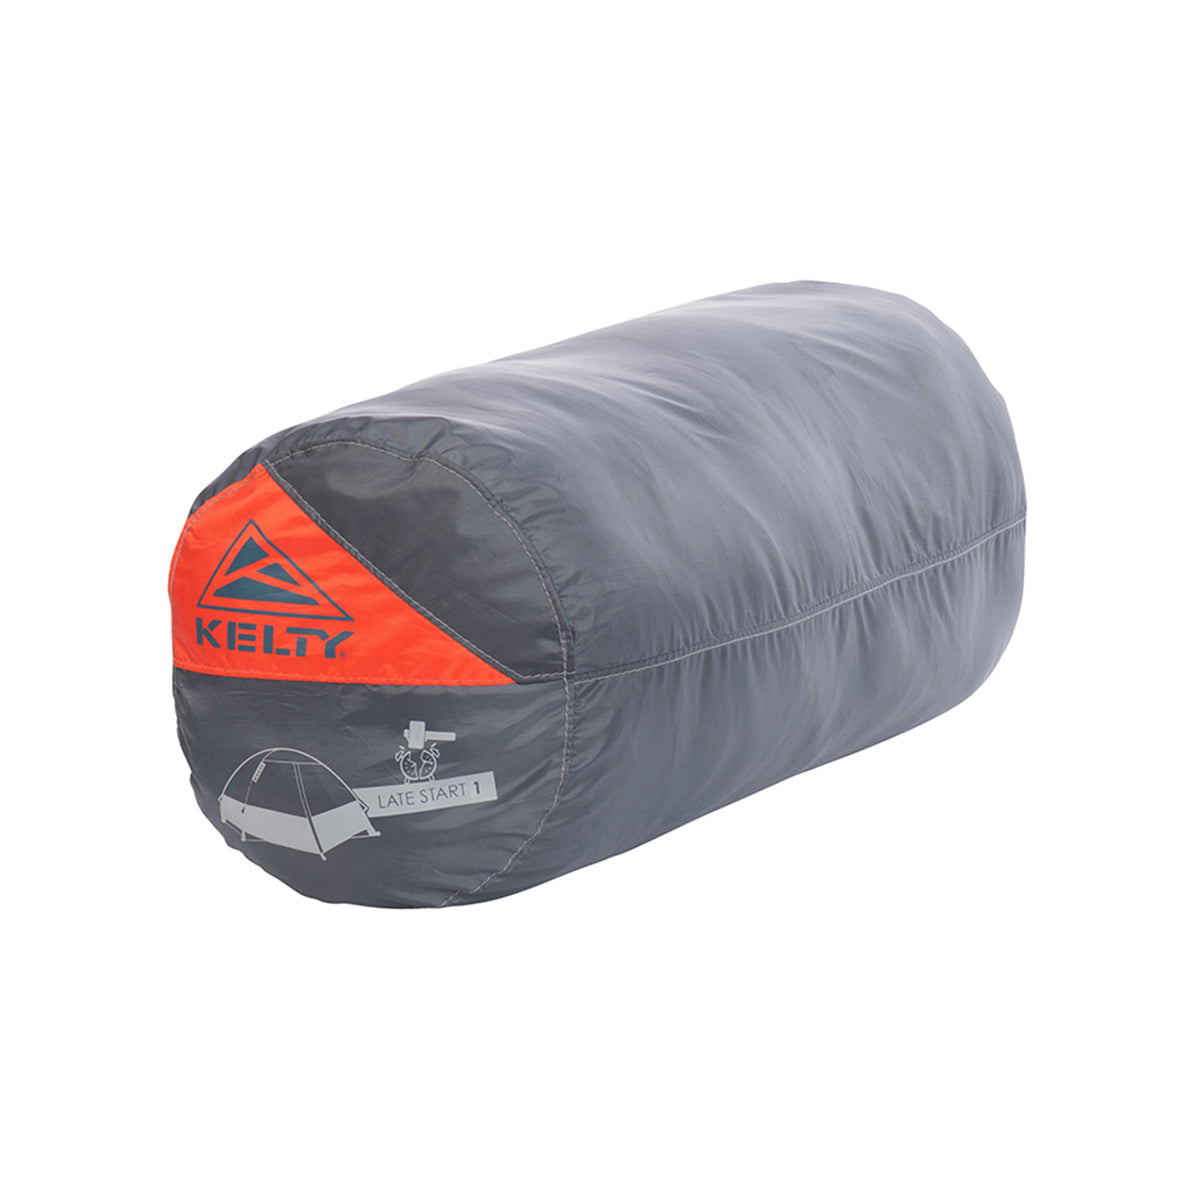 kelty late start 1 person tent in grey stuff sack